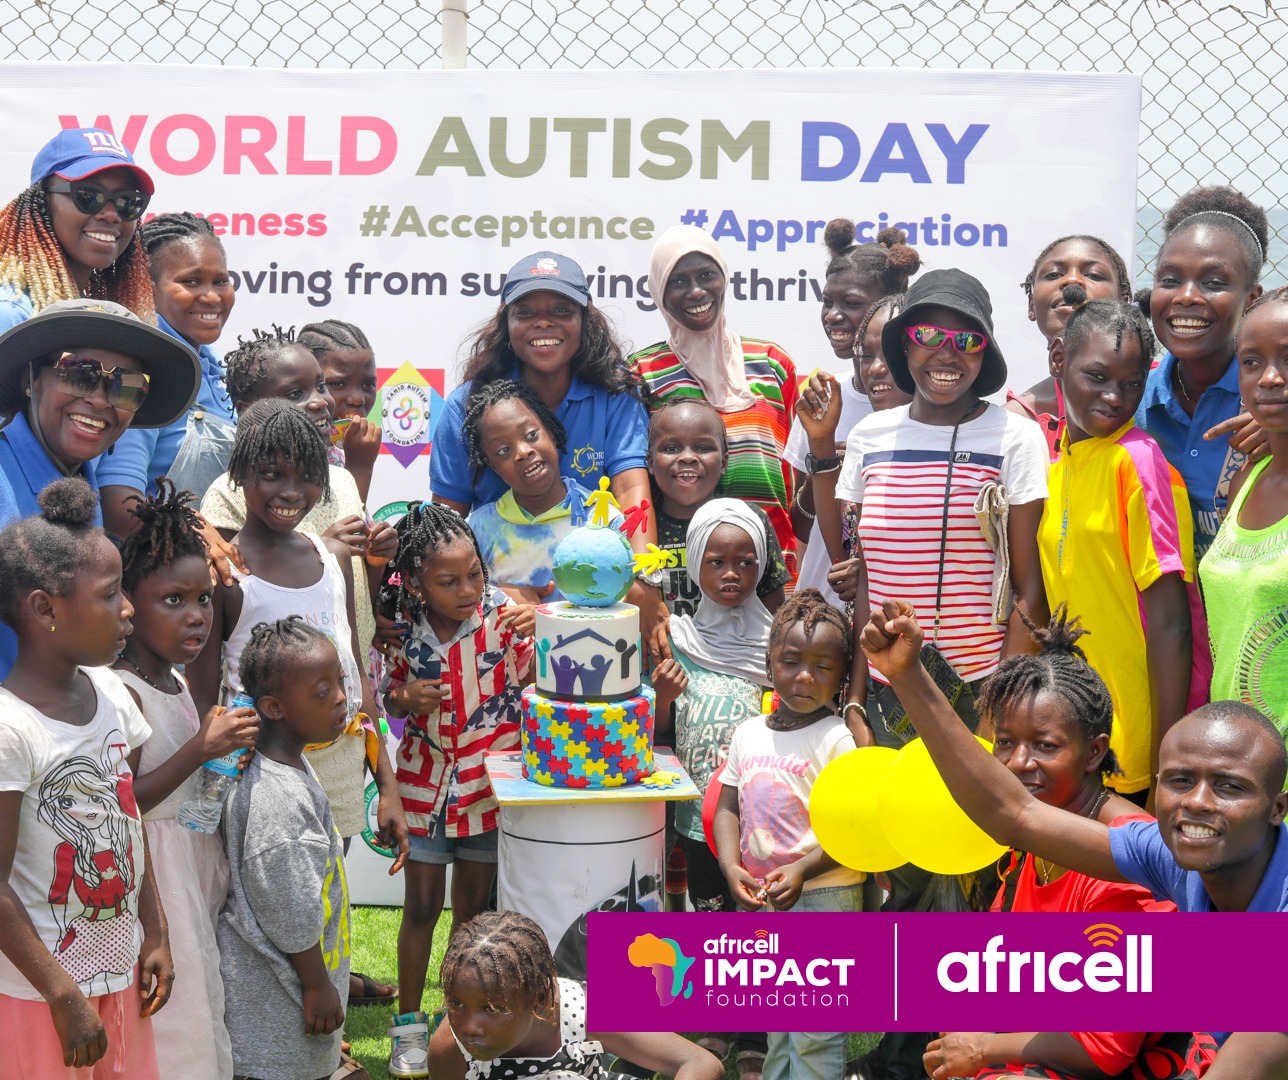 Africell Supports World Autism Day Commemoration